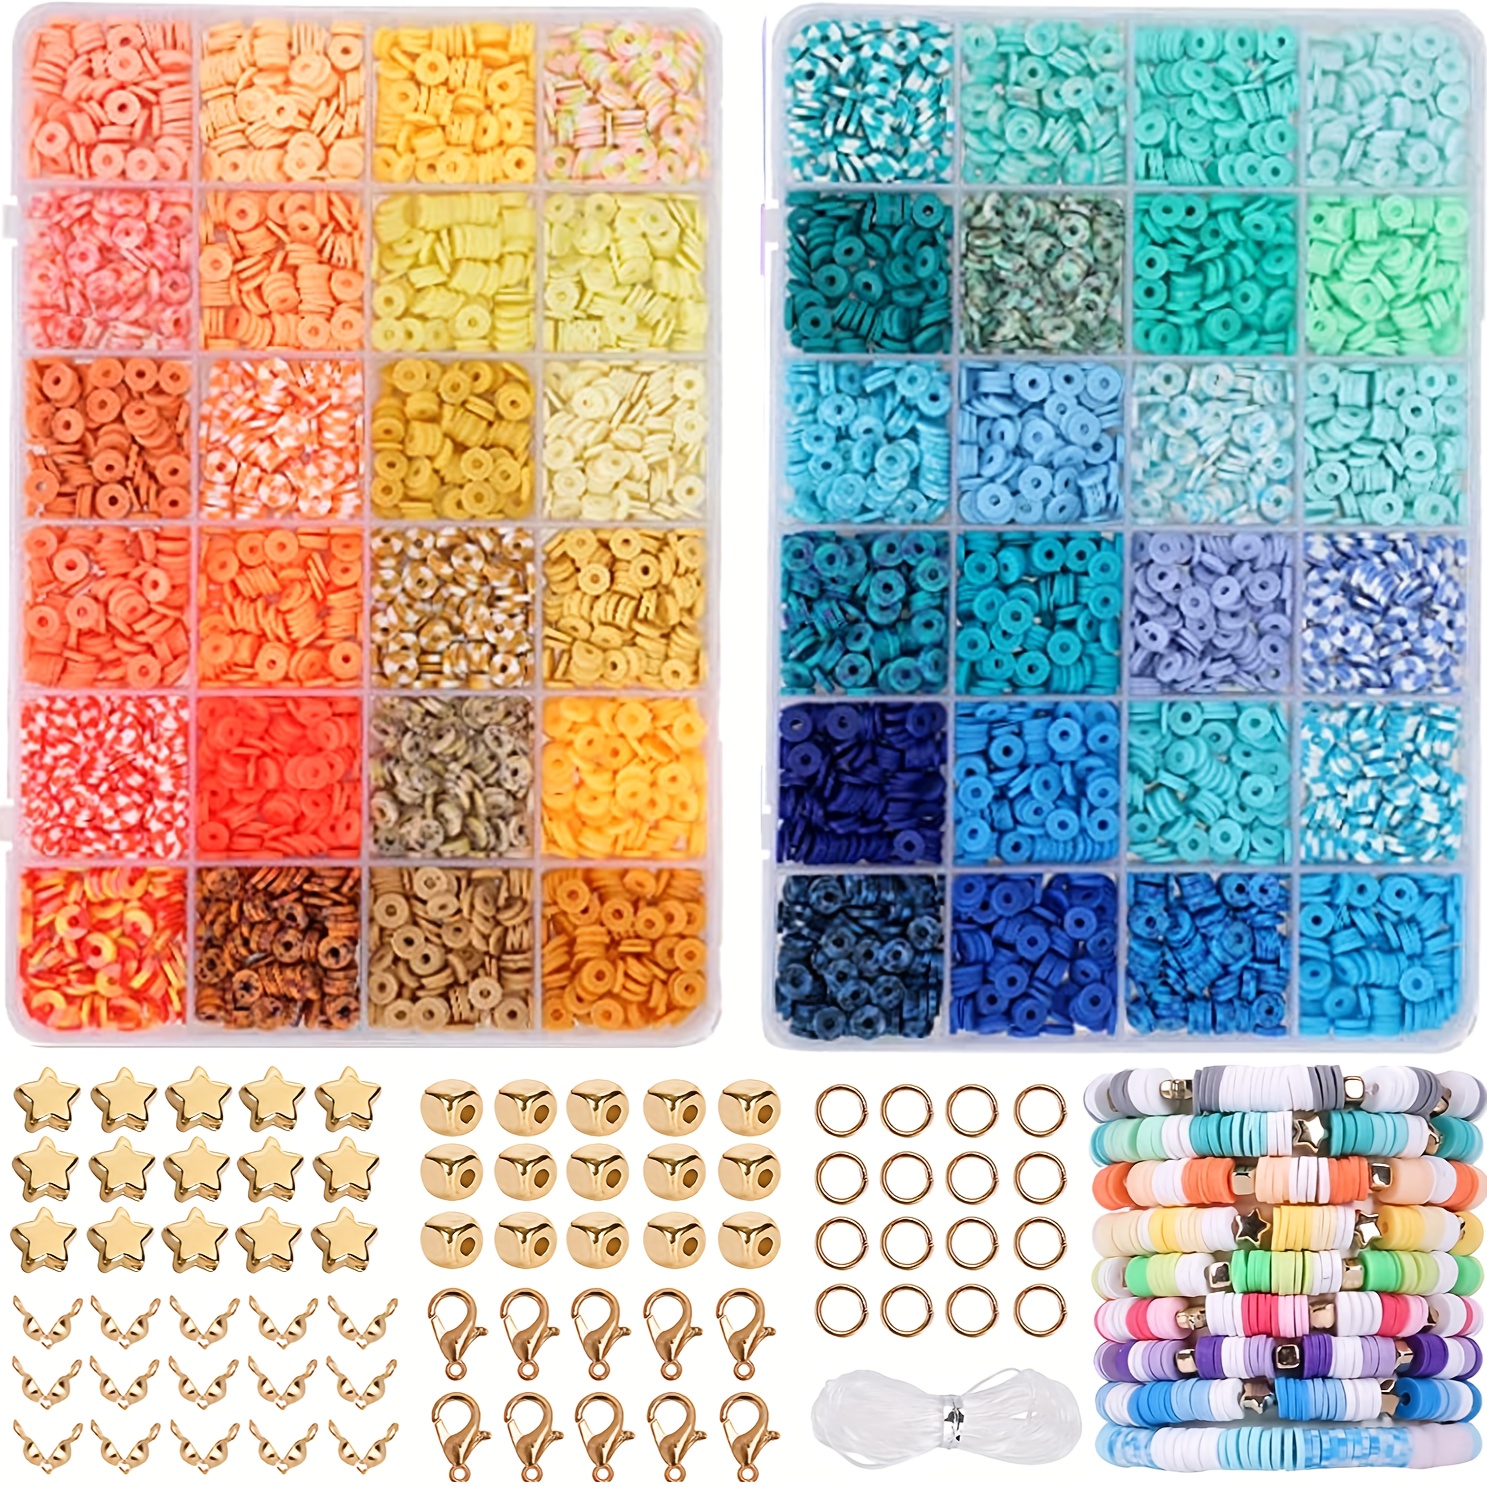 4800pcs Clay Beads for Bracelet Making Kit 48 Colors Flat Round